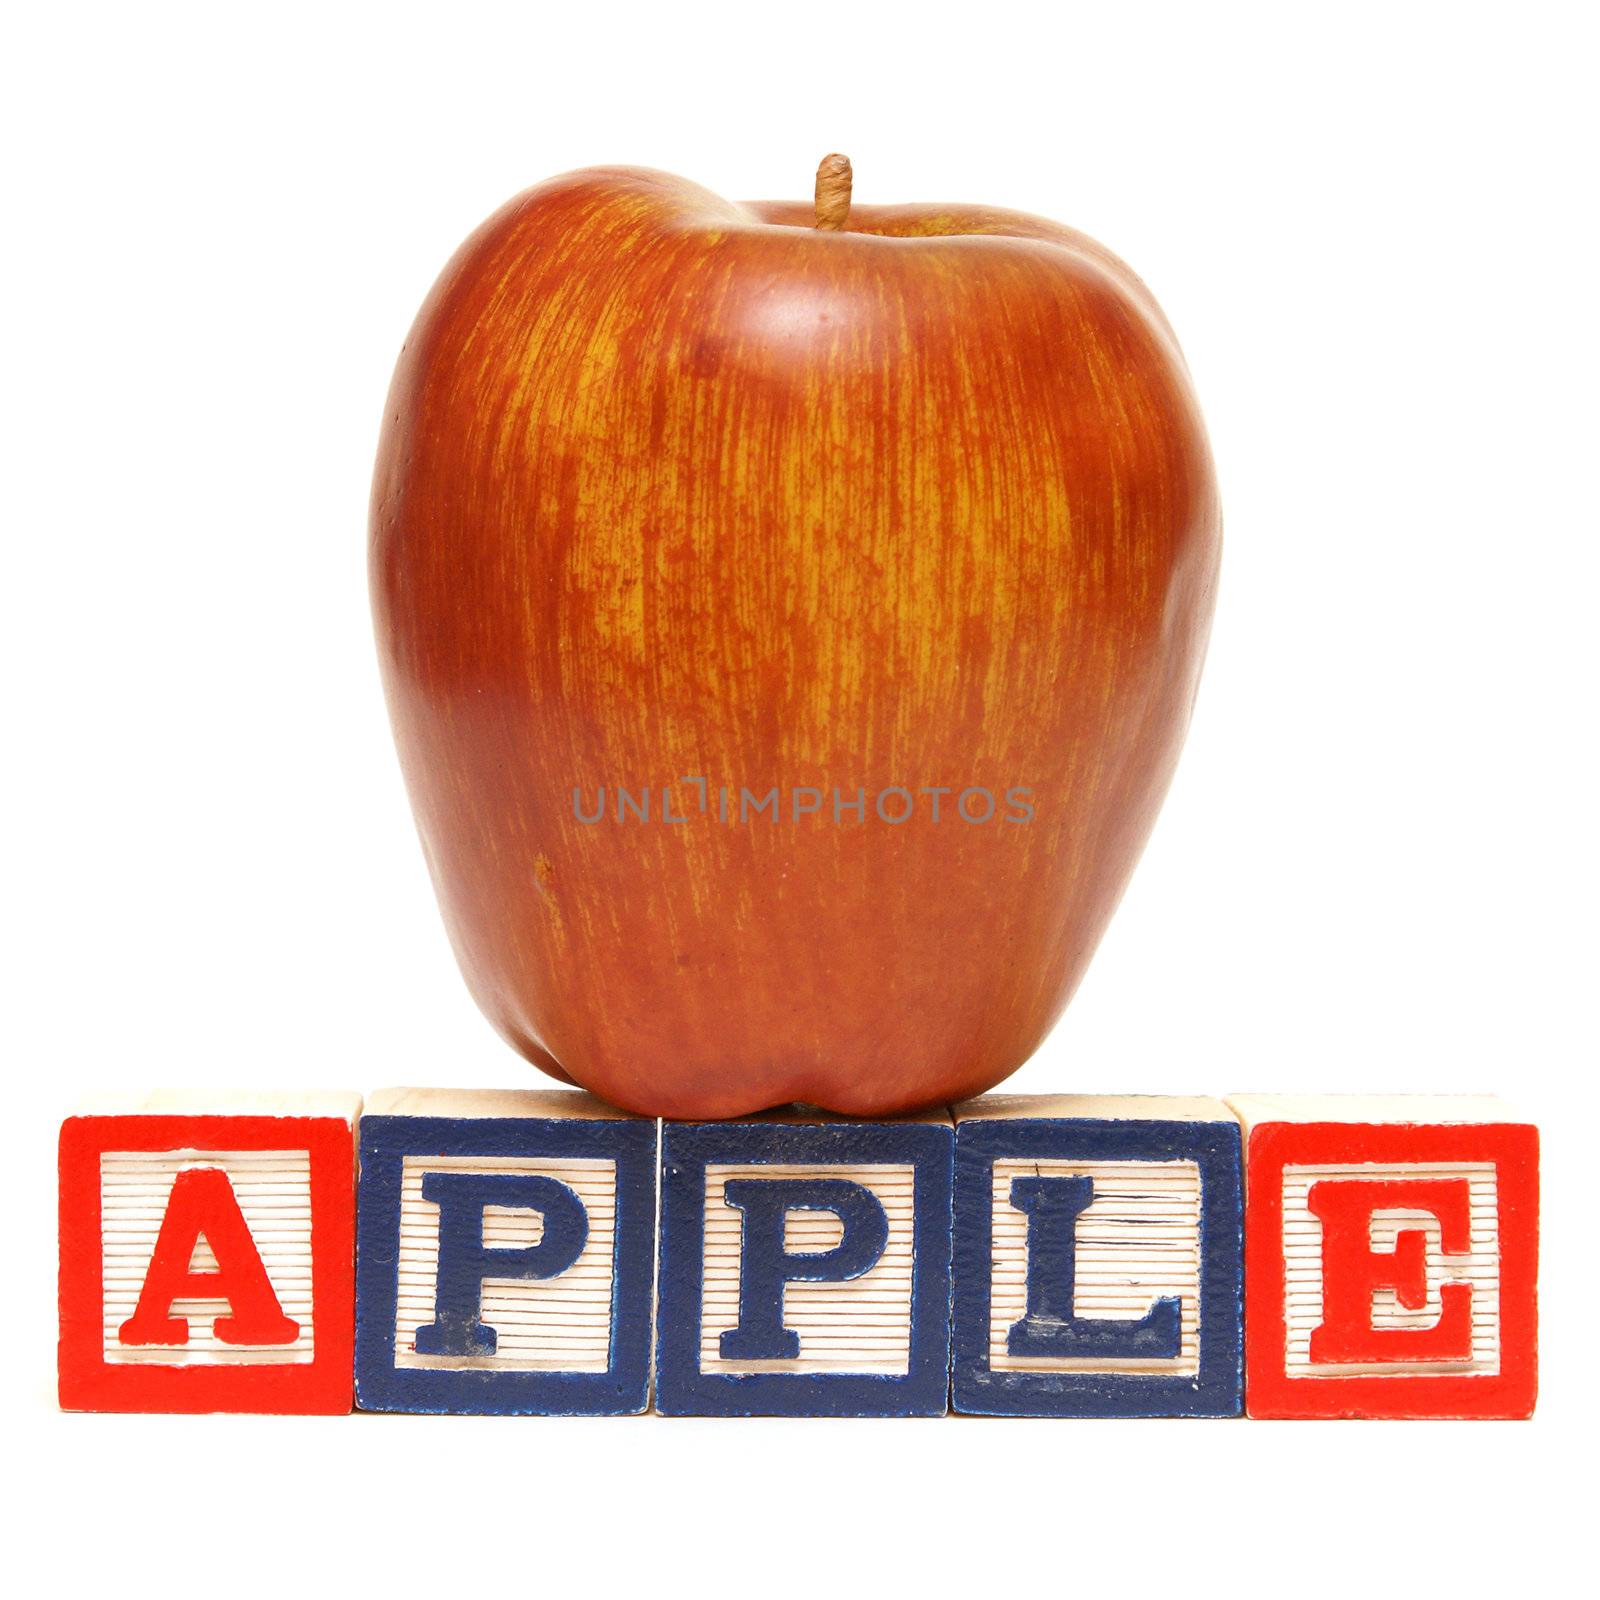 Alphabet blocks spell out the word apple with the healthy fruit being displayed.